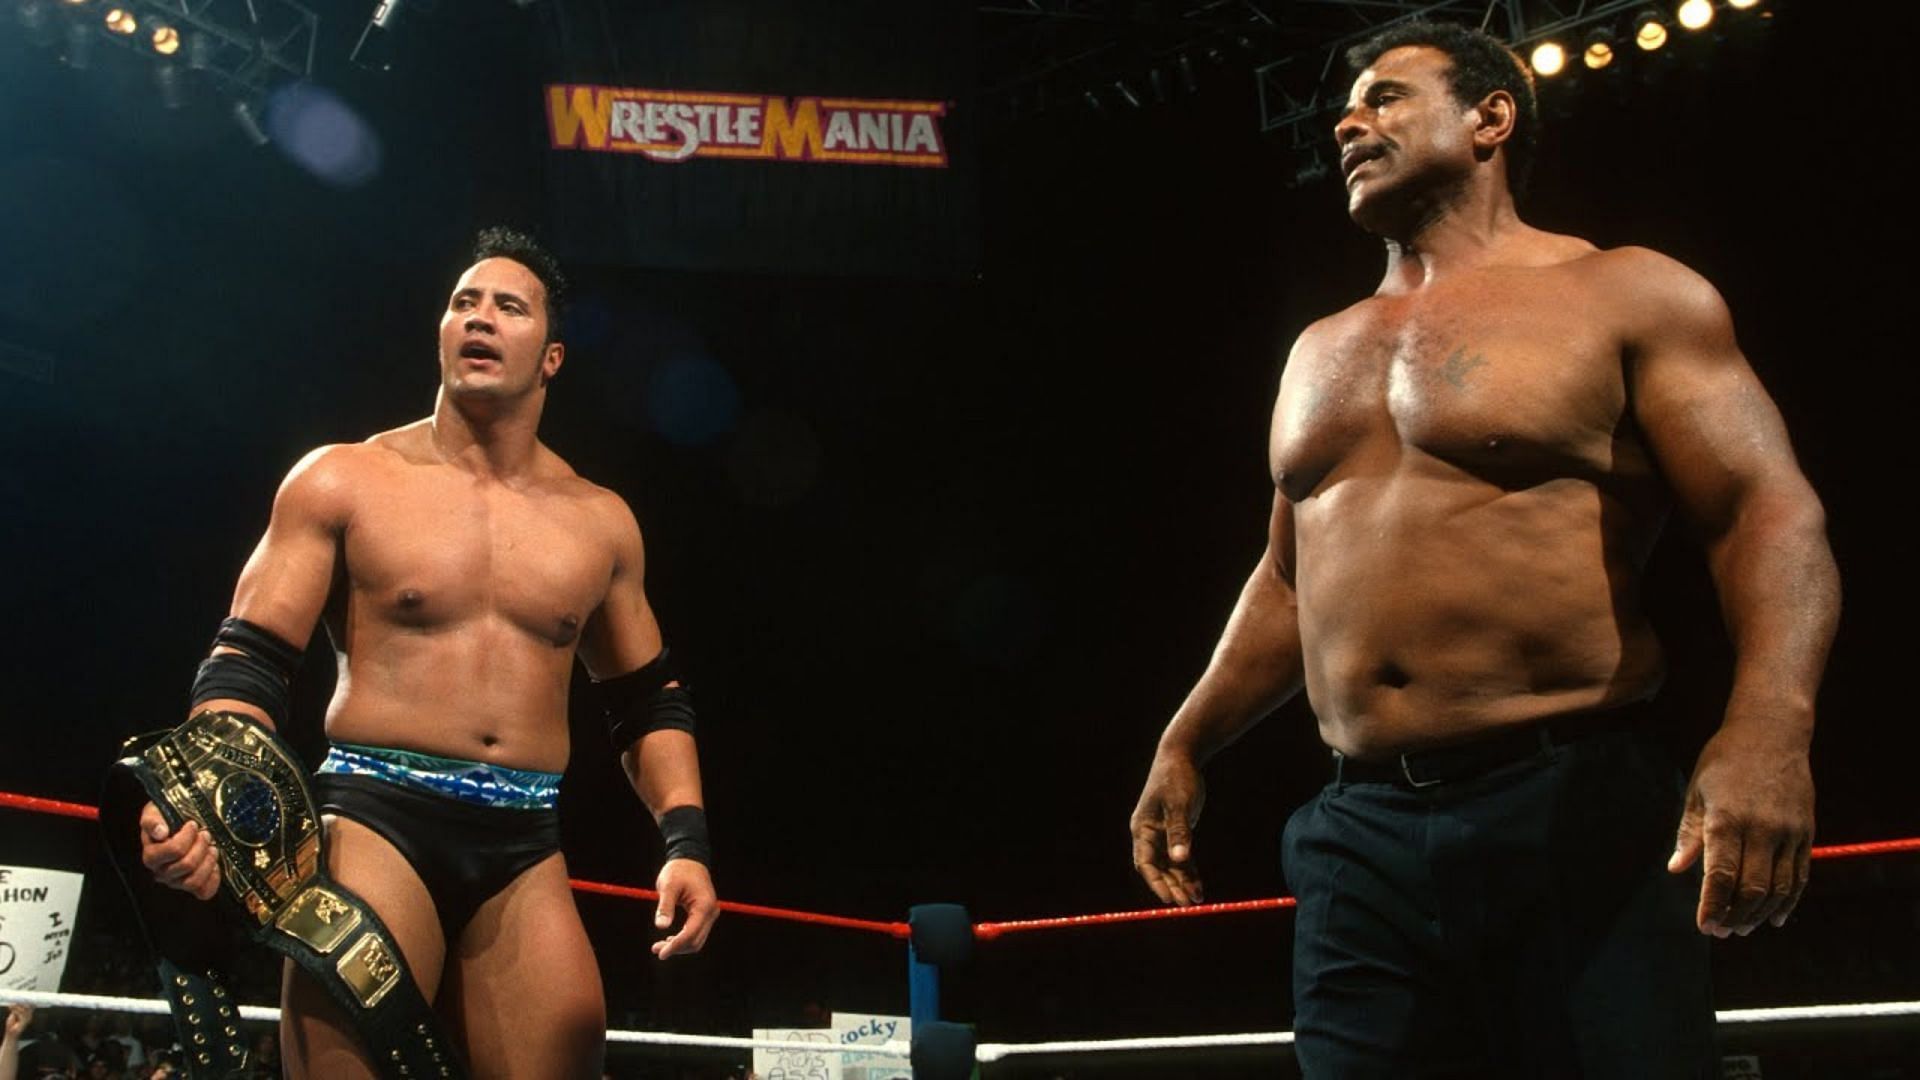 The Rock (left) and Rocky Johnson (right) at WrestleMania 13